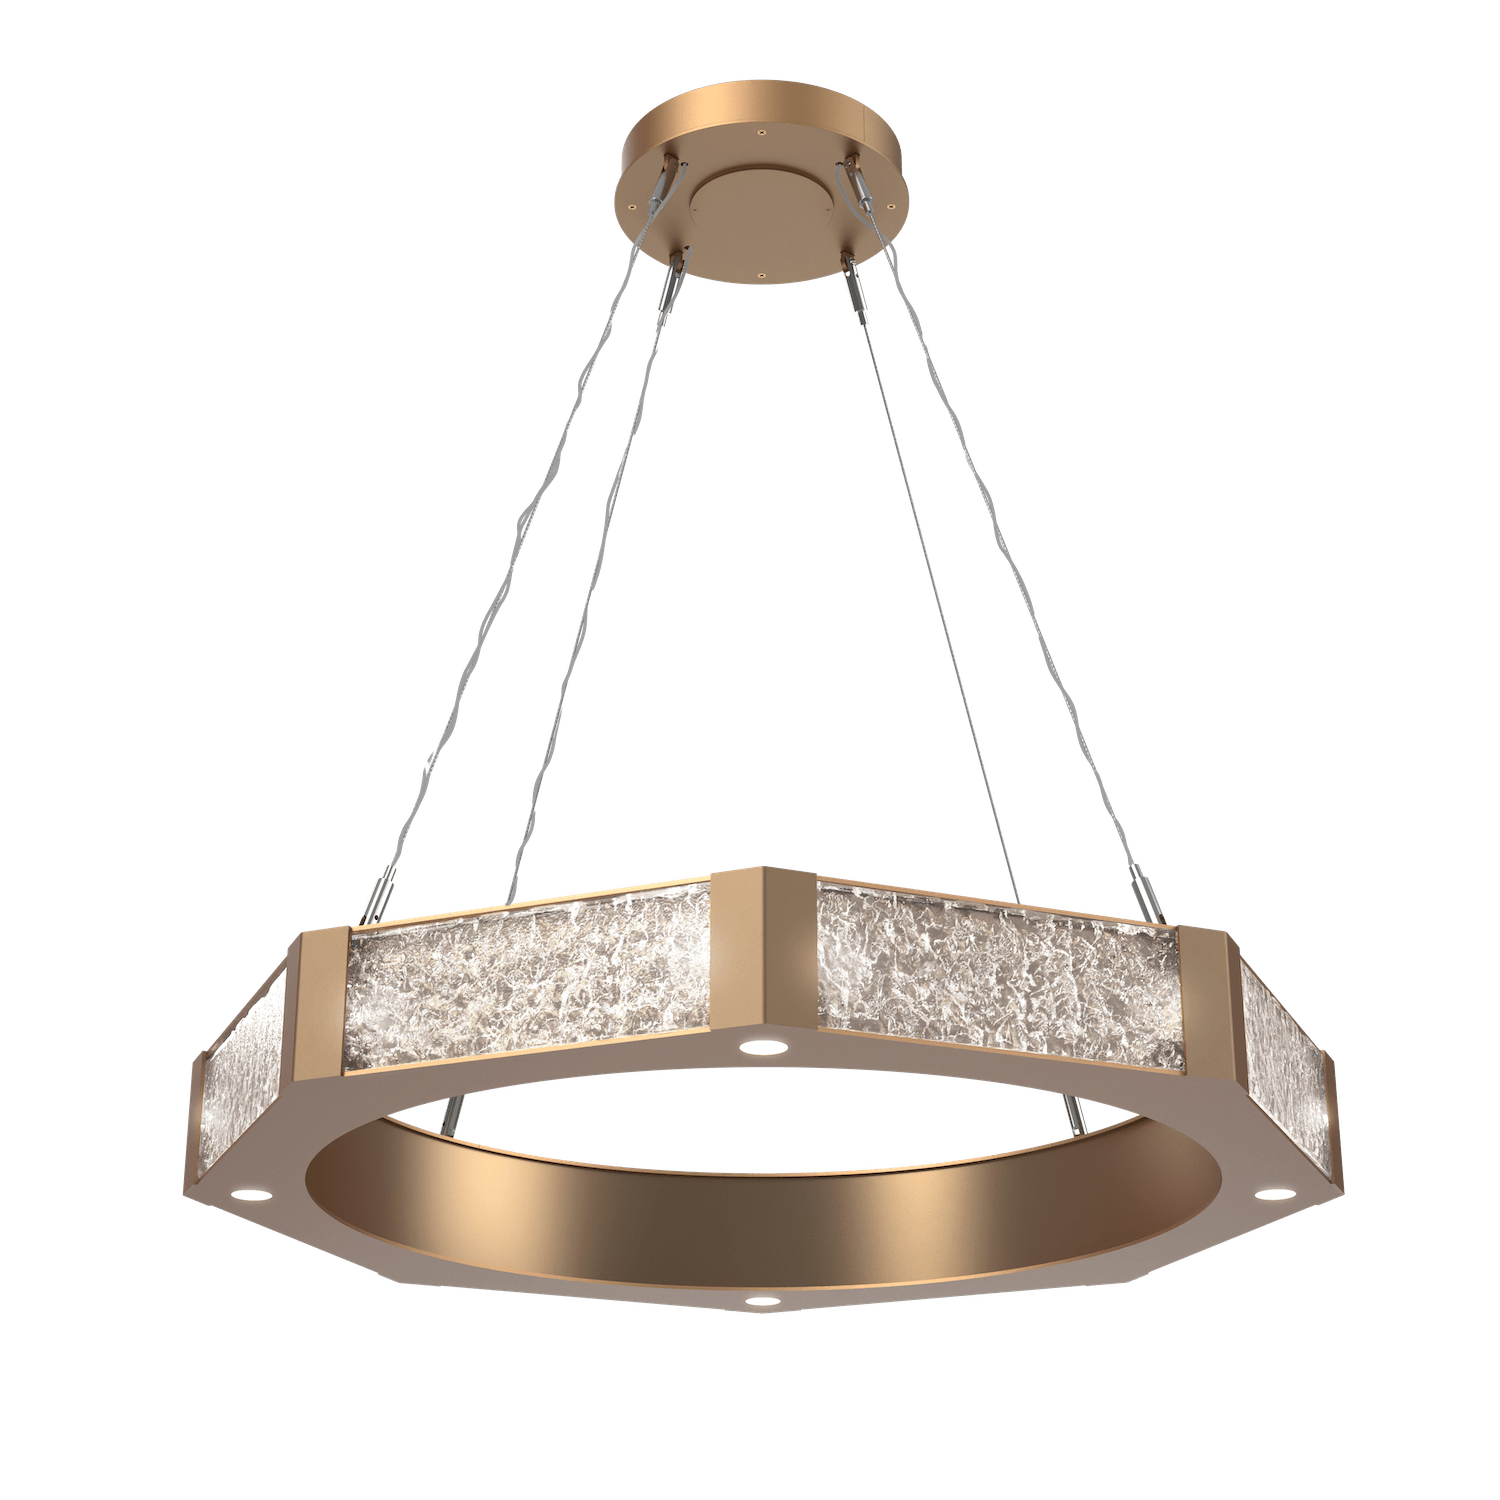 CHB0061-36-NB-GC-Hammerton-Studio-Glacier-36-inch-ring-chandelier-with-novel-brass-finish-and-clear-blown-glass-with-geo-clear-cast-glass-diffusers-and-LED-lamping